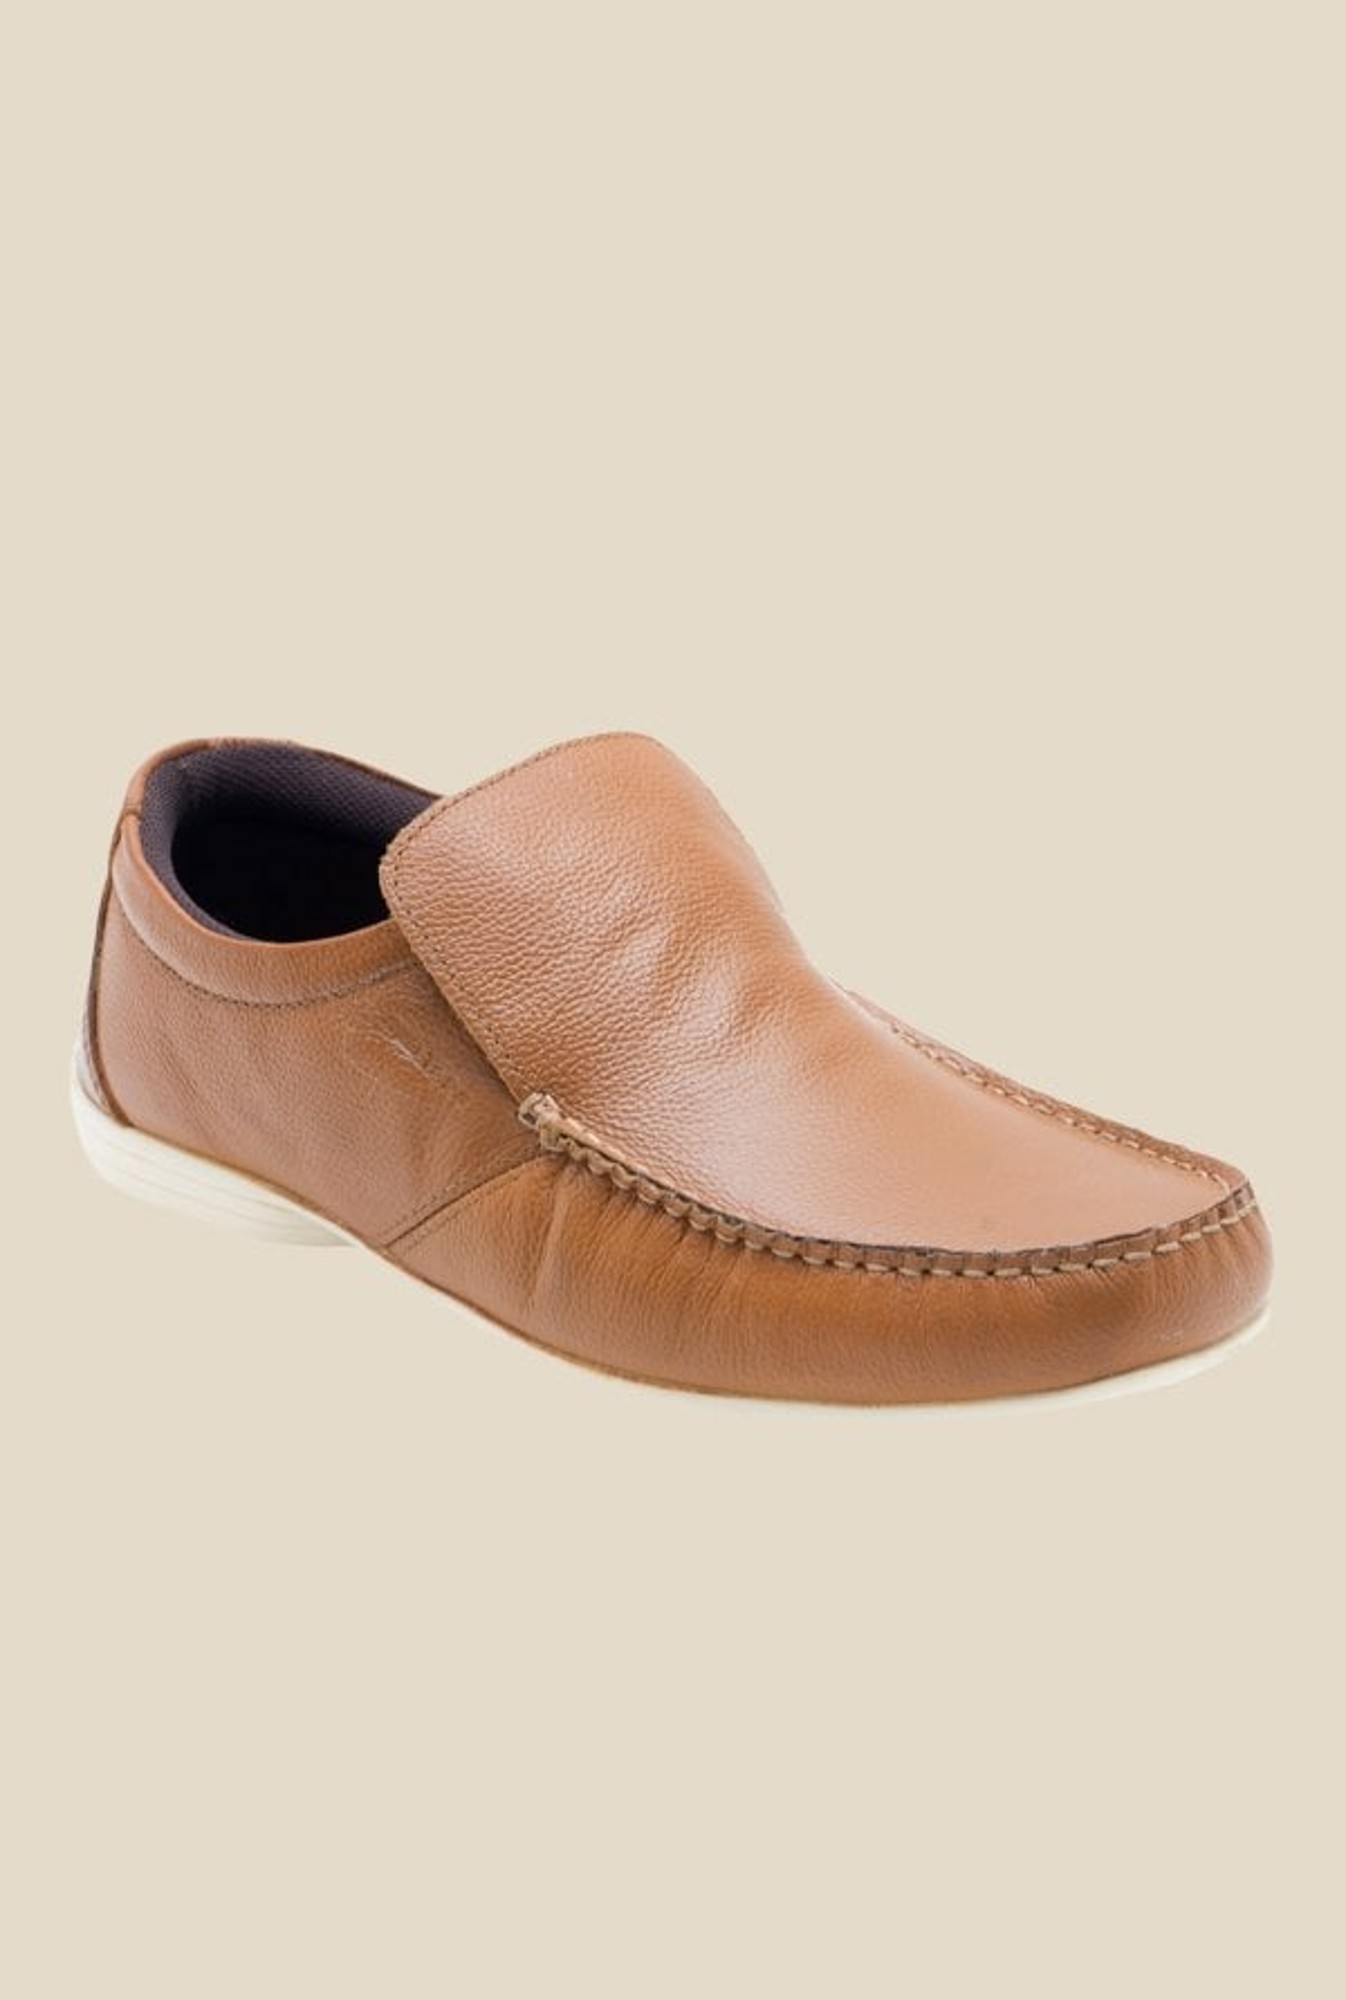 Buy Red Tape Tan Casual Slip-Ons for 